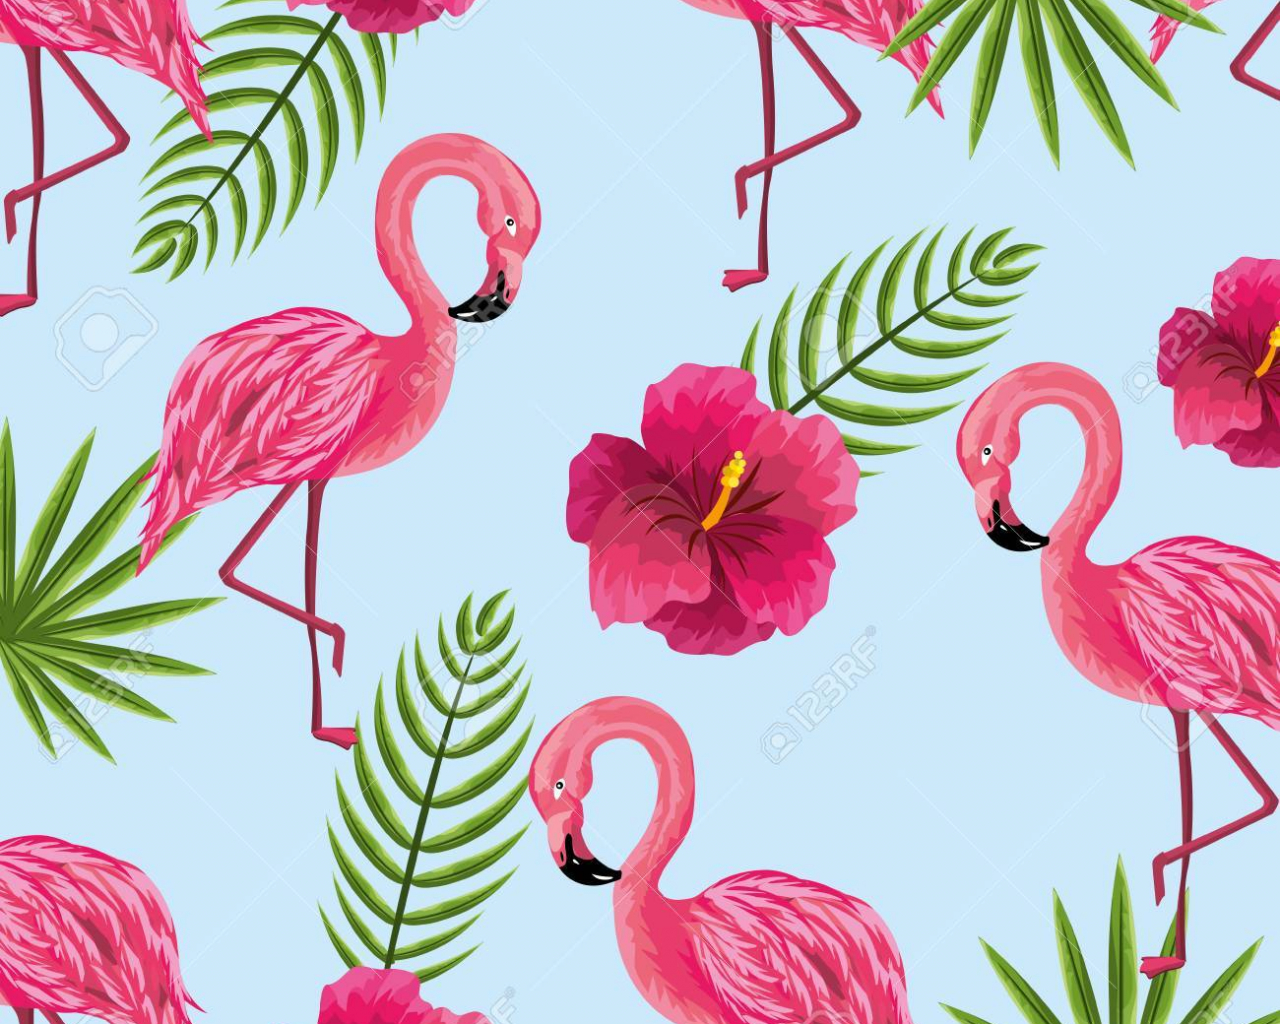 Beauty And Cute Flowers Plants With Flamingo